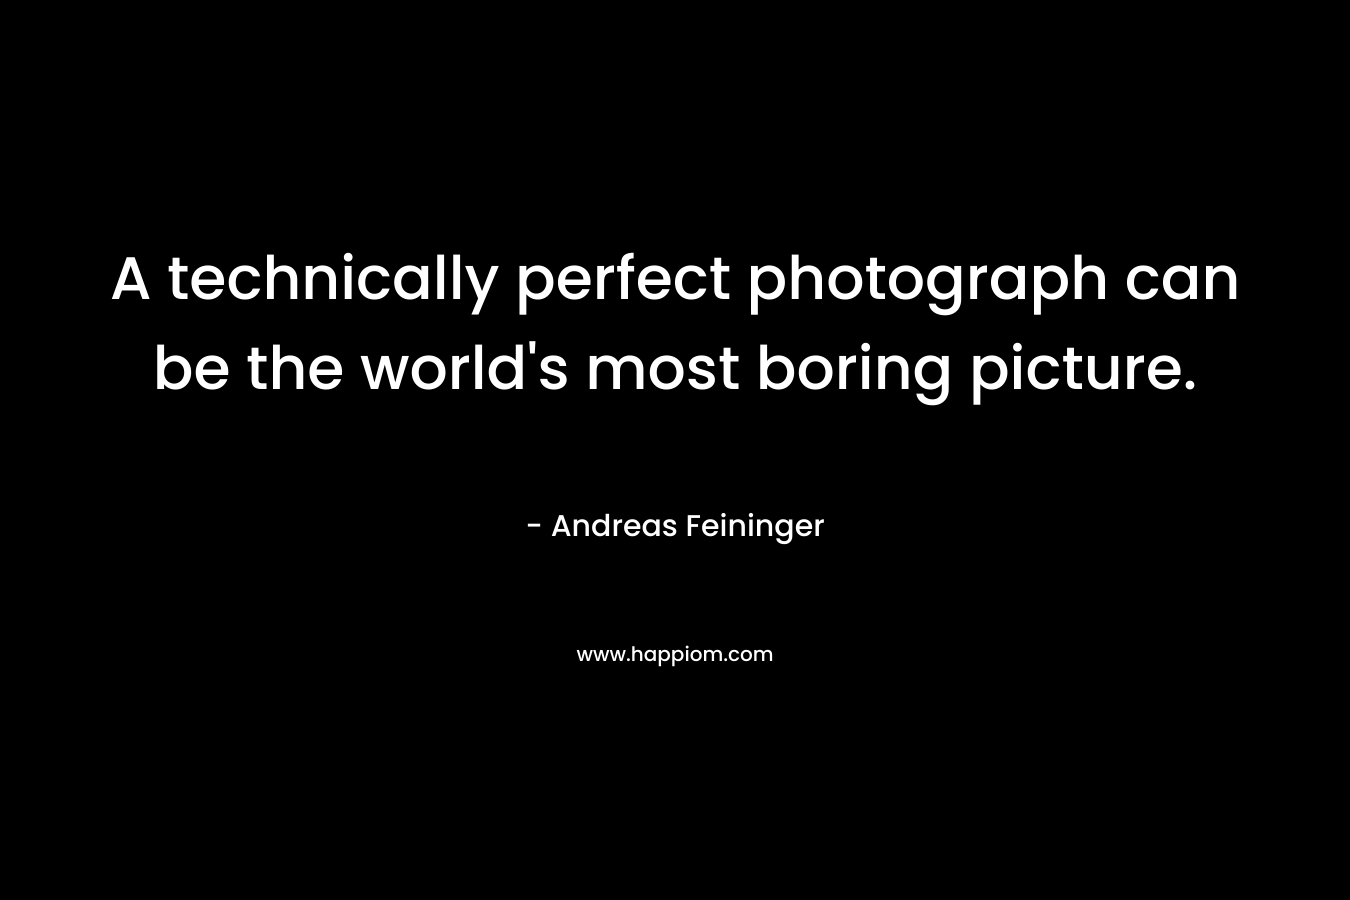 A technically perfect photograph can be the world’s most boring picture. – Andreas Feininger